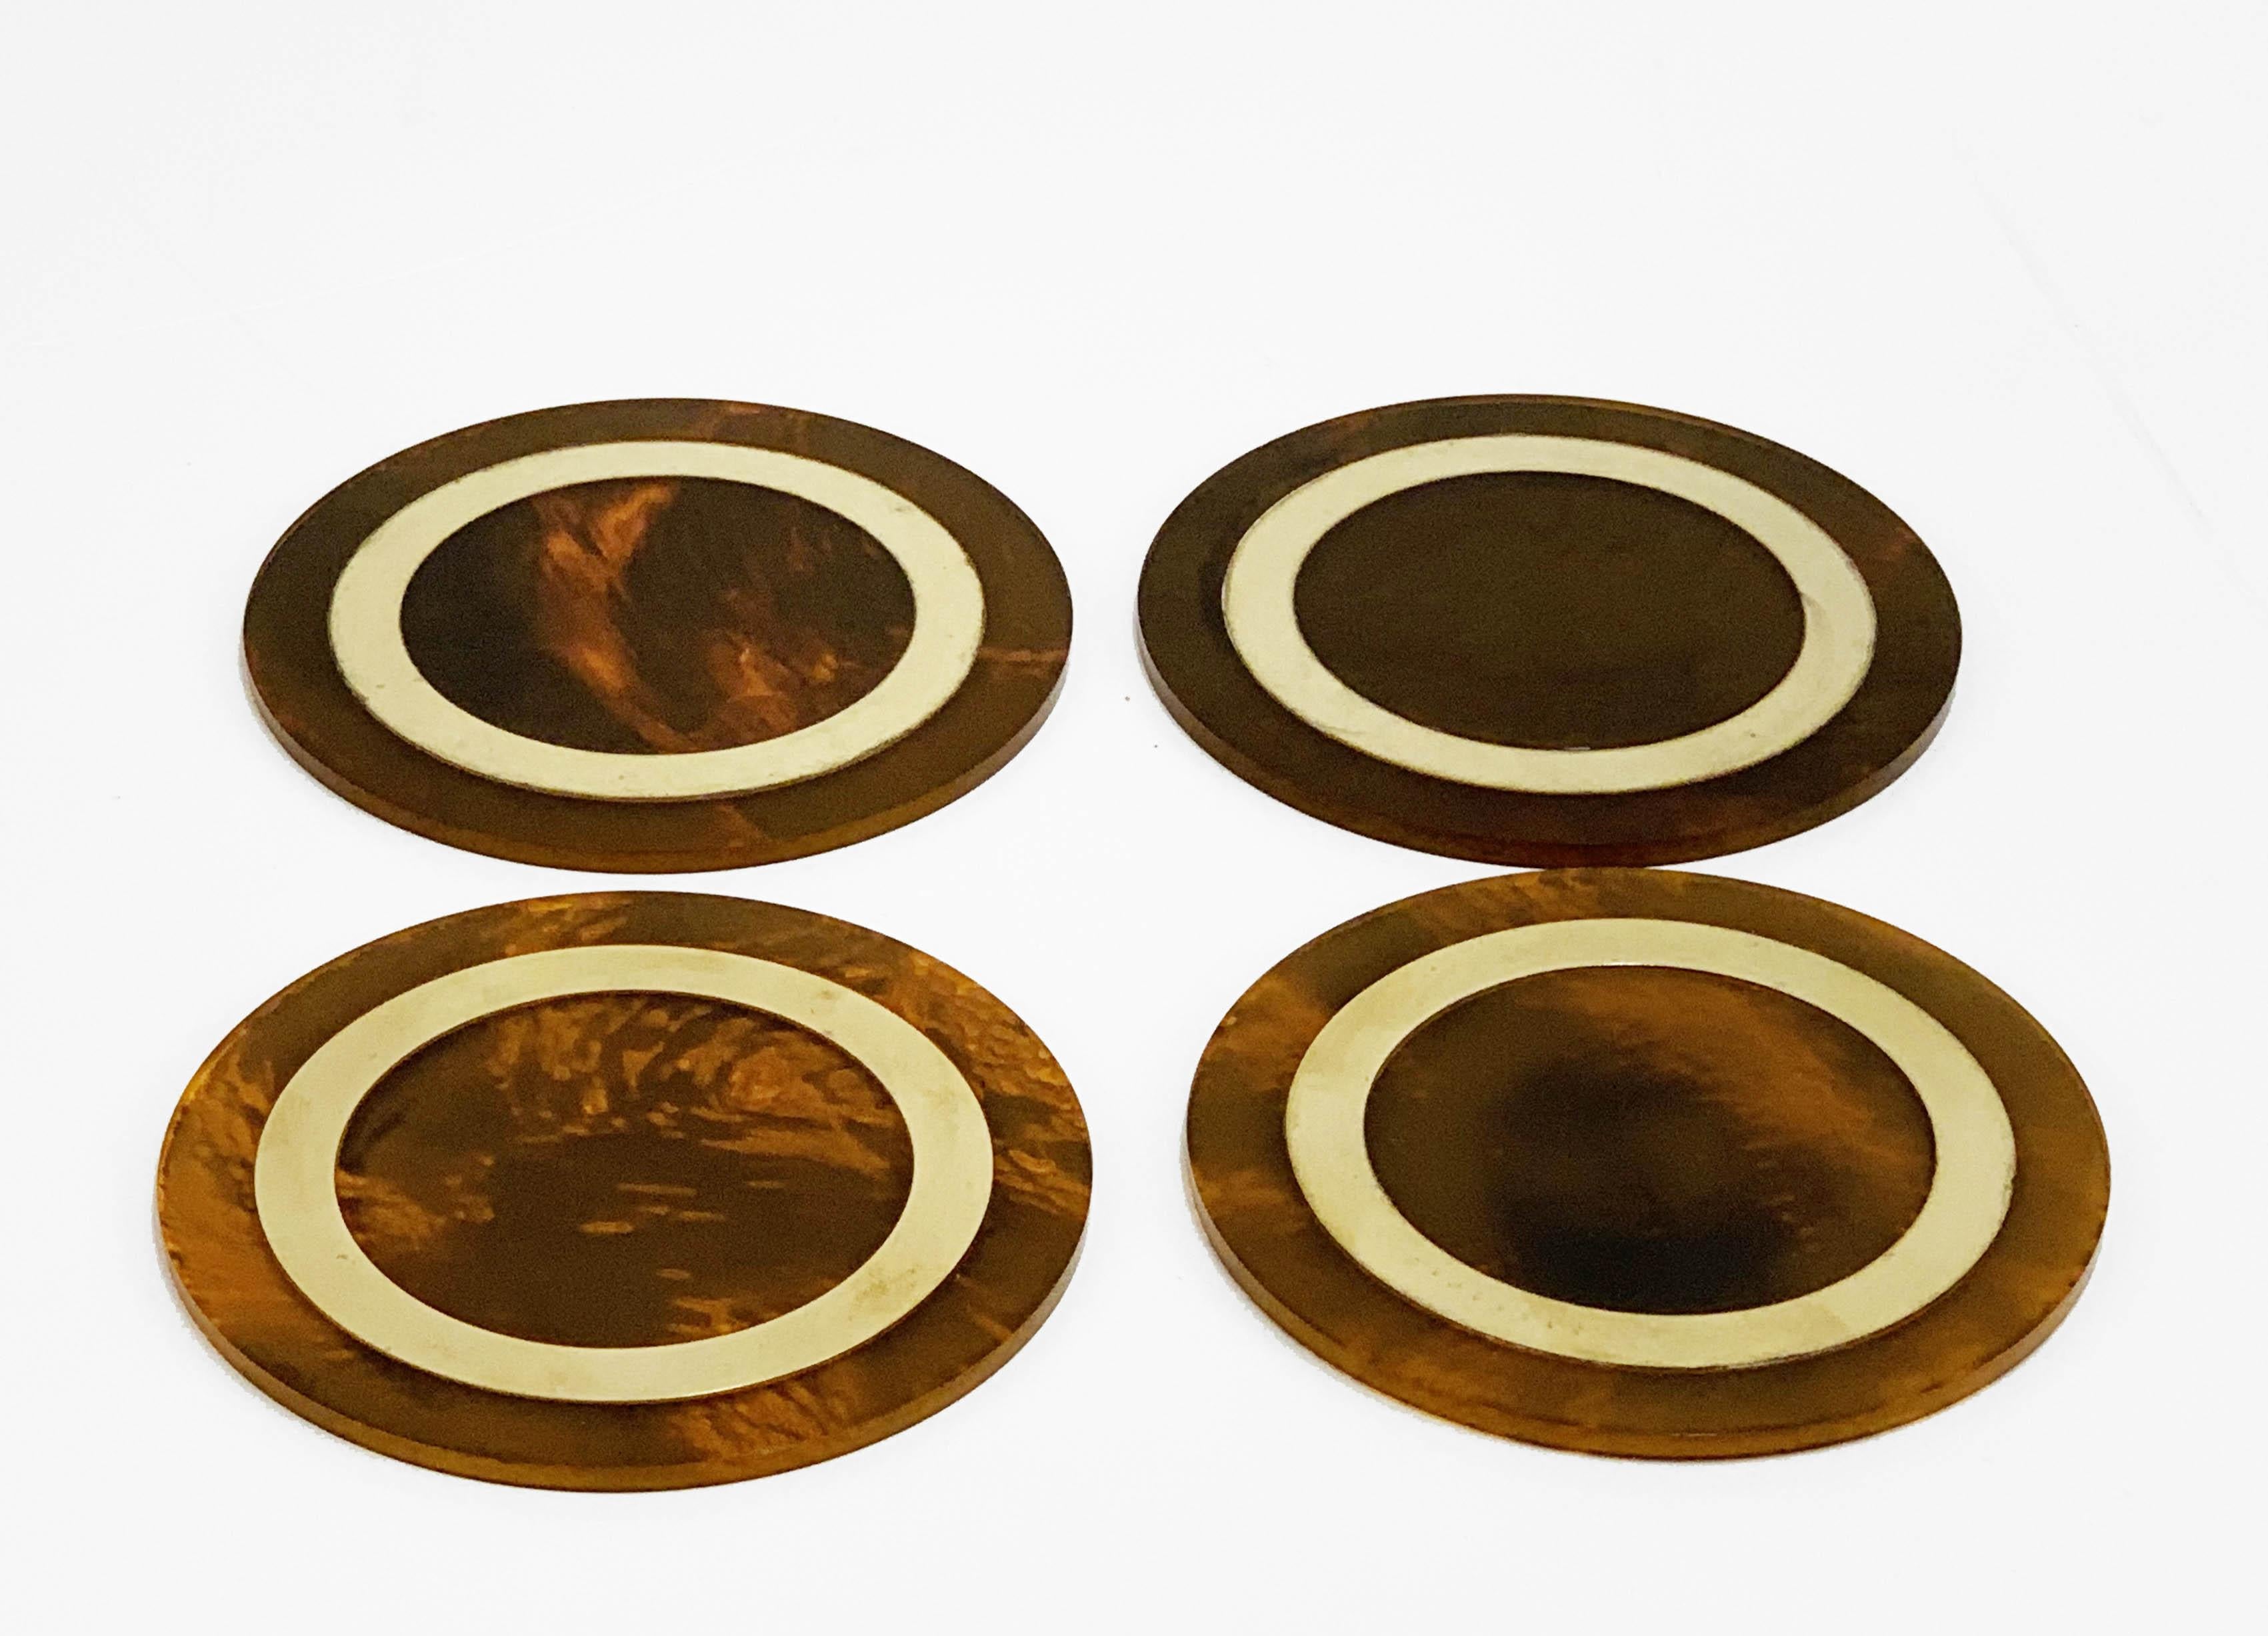 Wonderful set of 4 midcentury coasters in tortoiseshell plexiglass and brass. This set was produced in Italy, during 1970s.

The brass round element enlights the contract with the tortoiseshell plexiglass. 

An elegant set that will decorate a